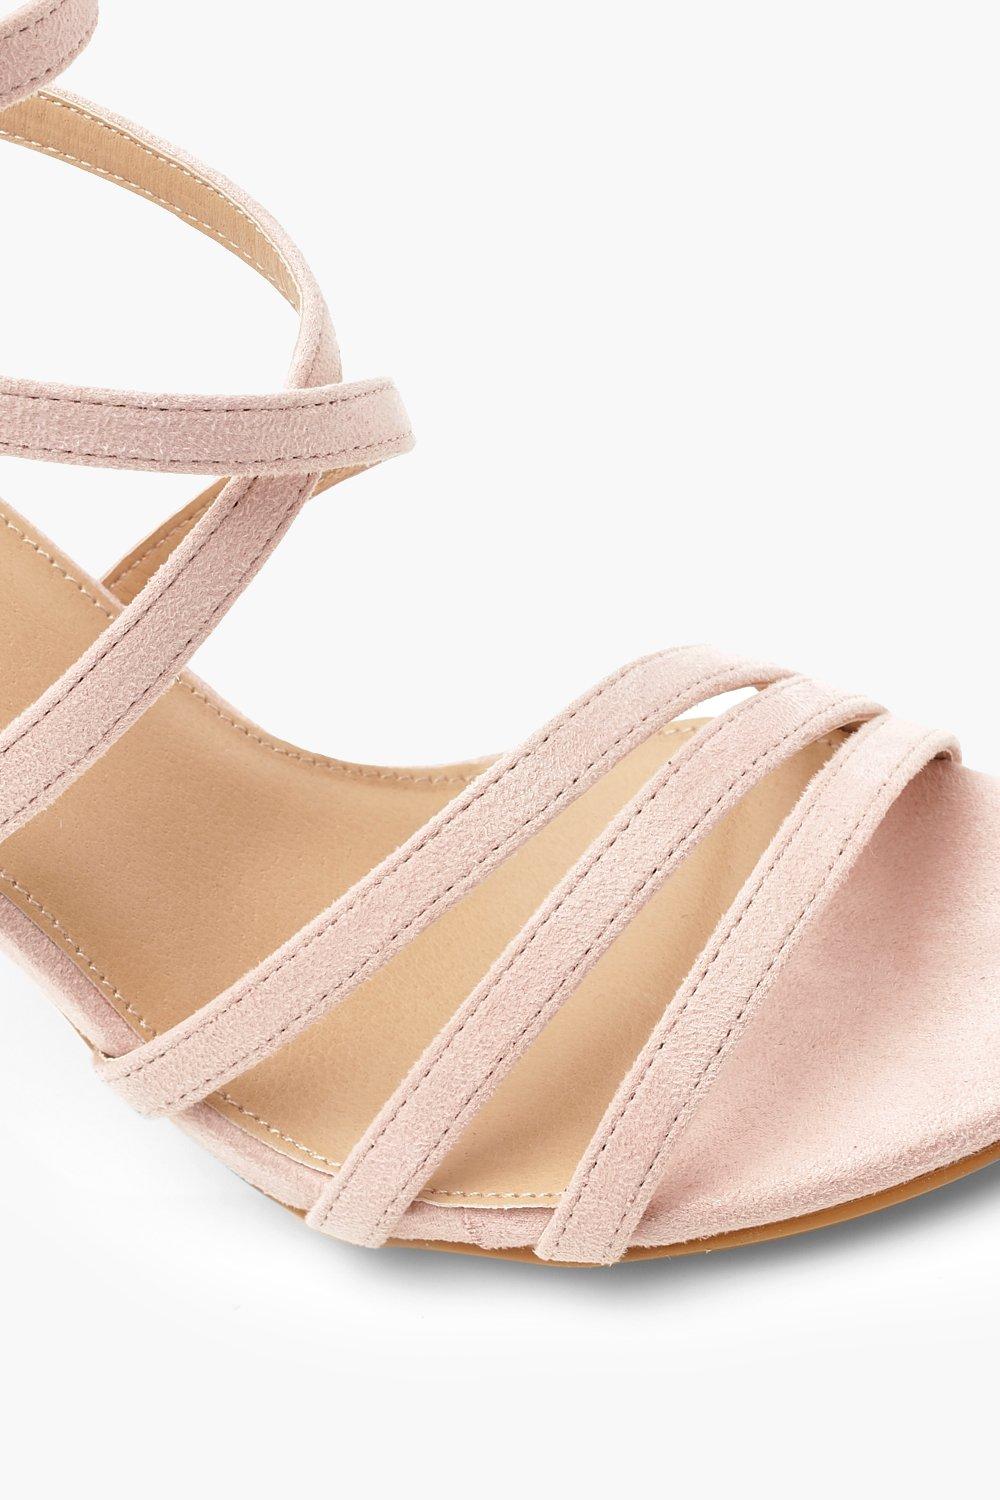 boohoo wide fit sandals